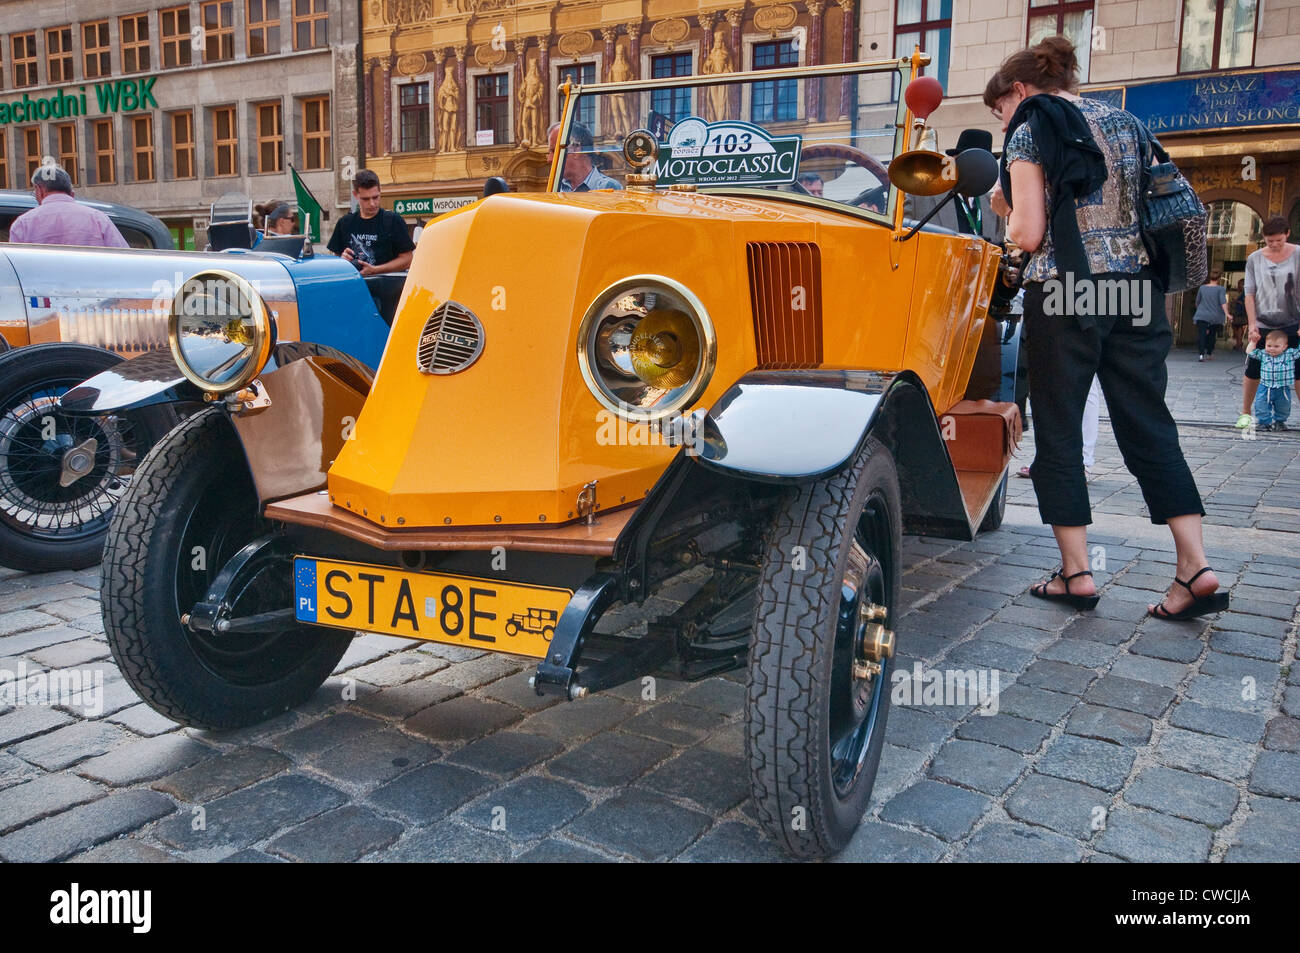 1925 Renault NN torpedo style open tourer at Motoclassic car show at Rynek (Market Square) in Wroclaw, Lower Silesia, Poland Stock Photo